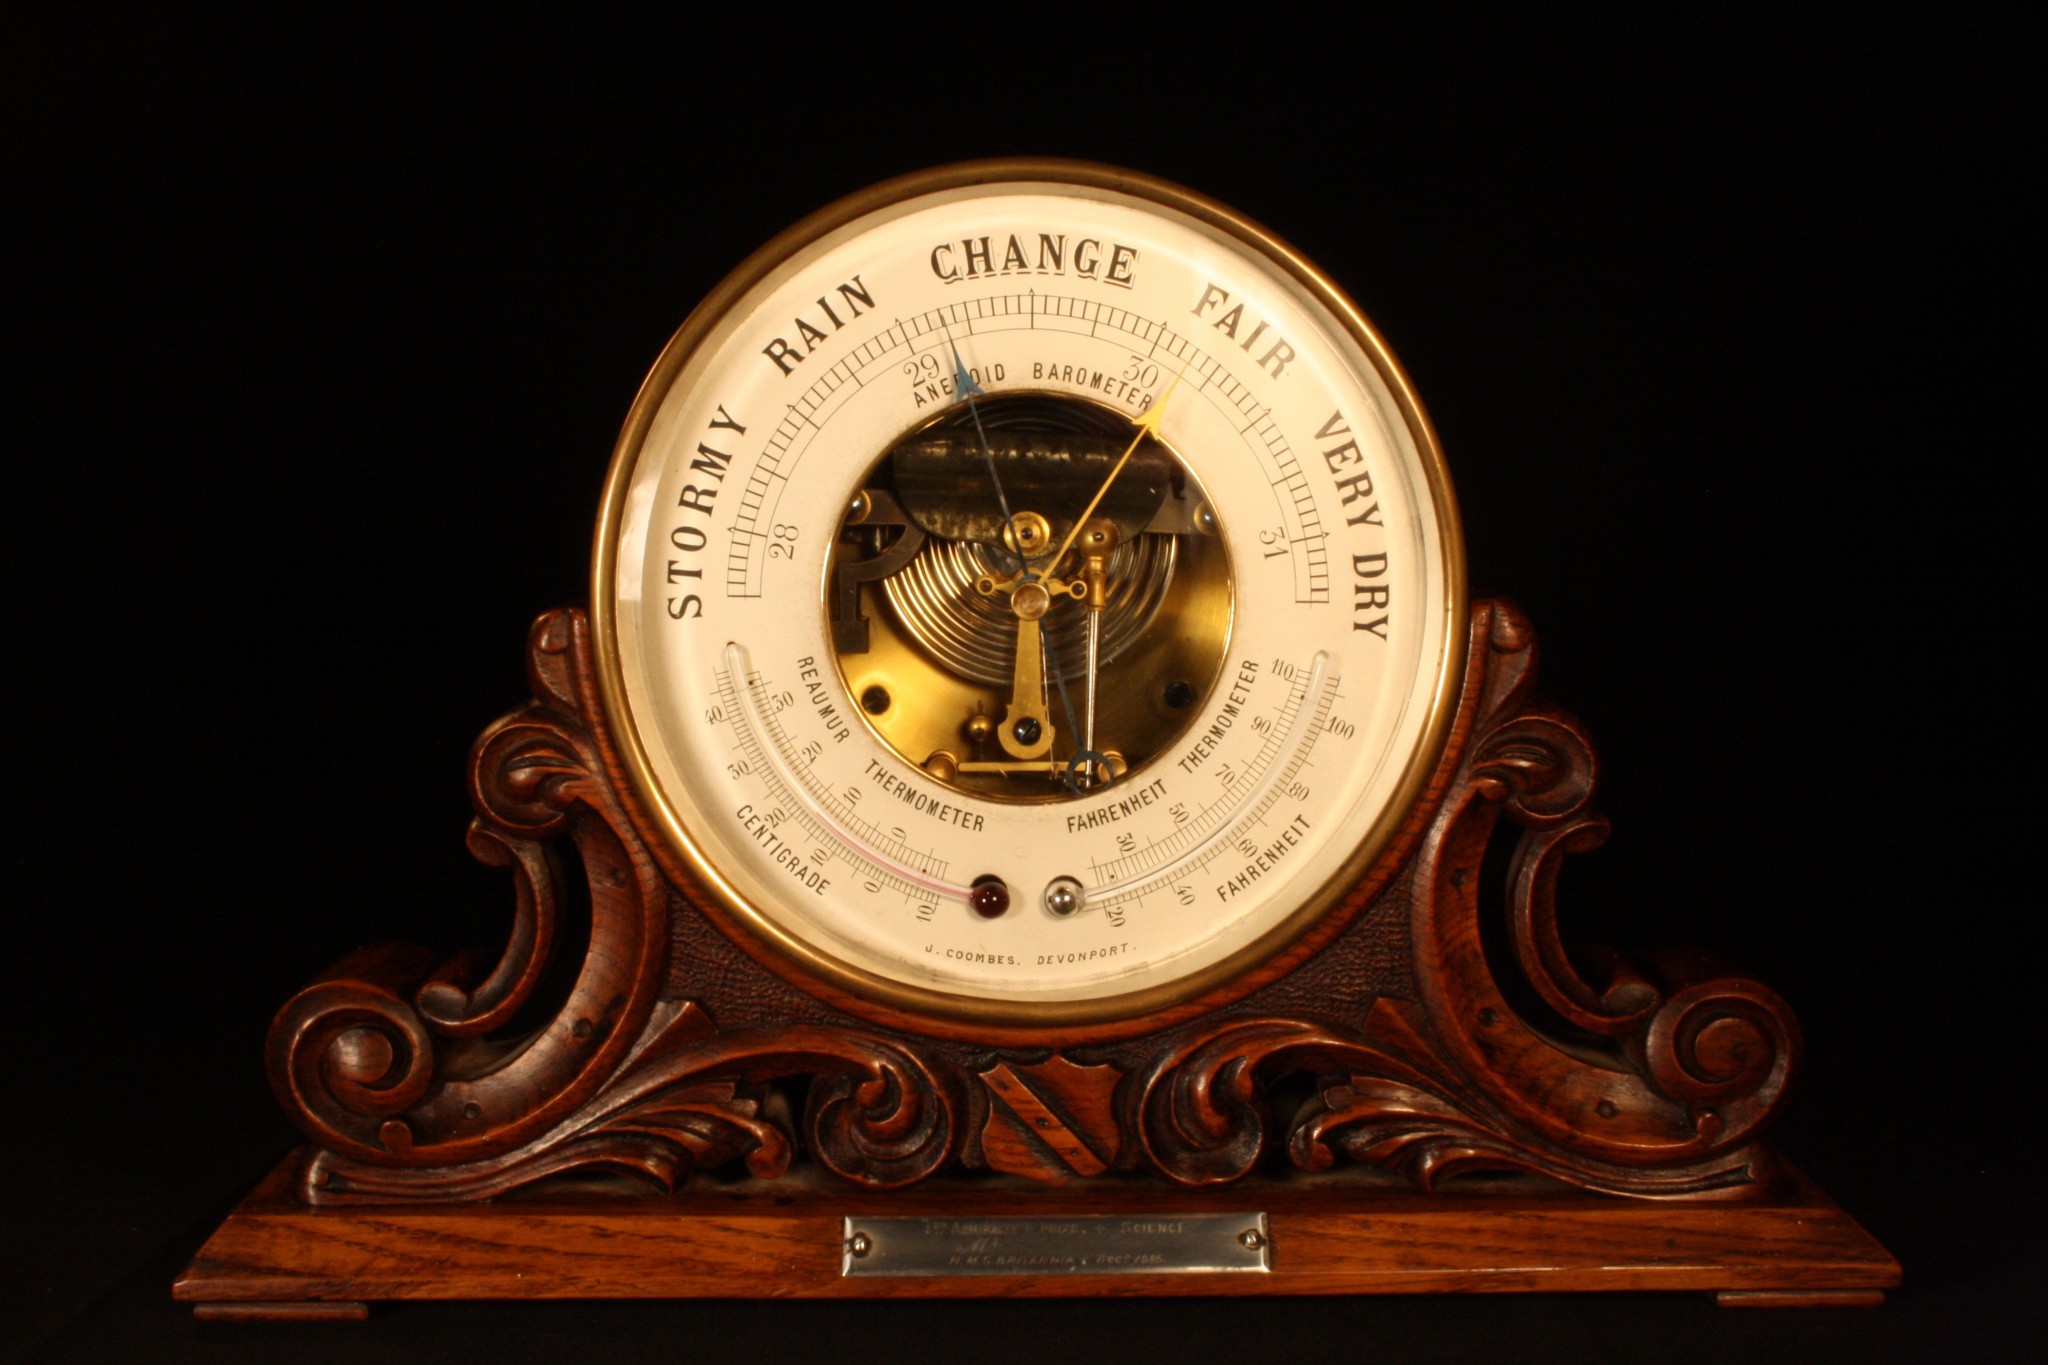 Image of Presentation Barometer by Coombes